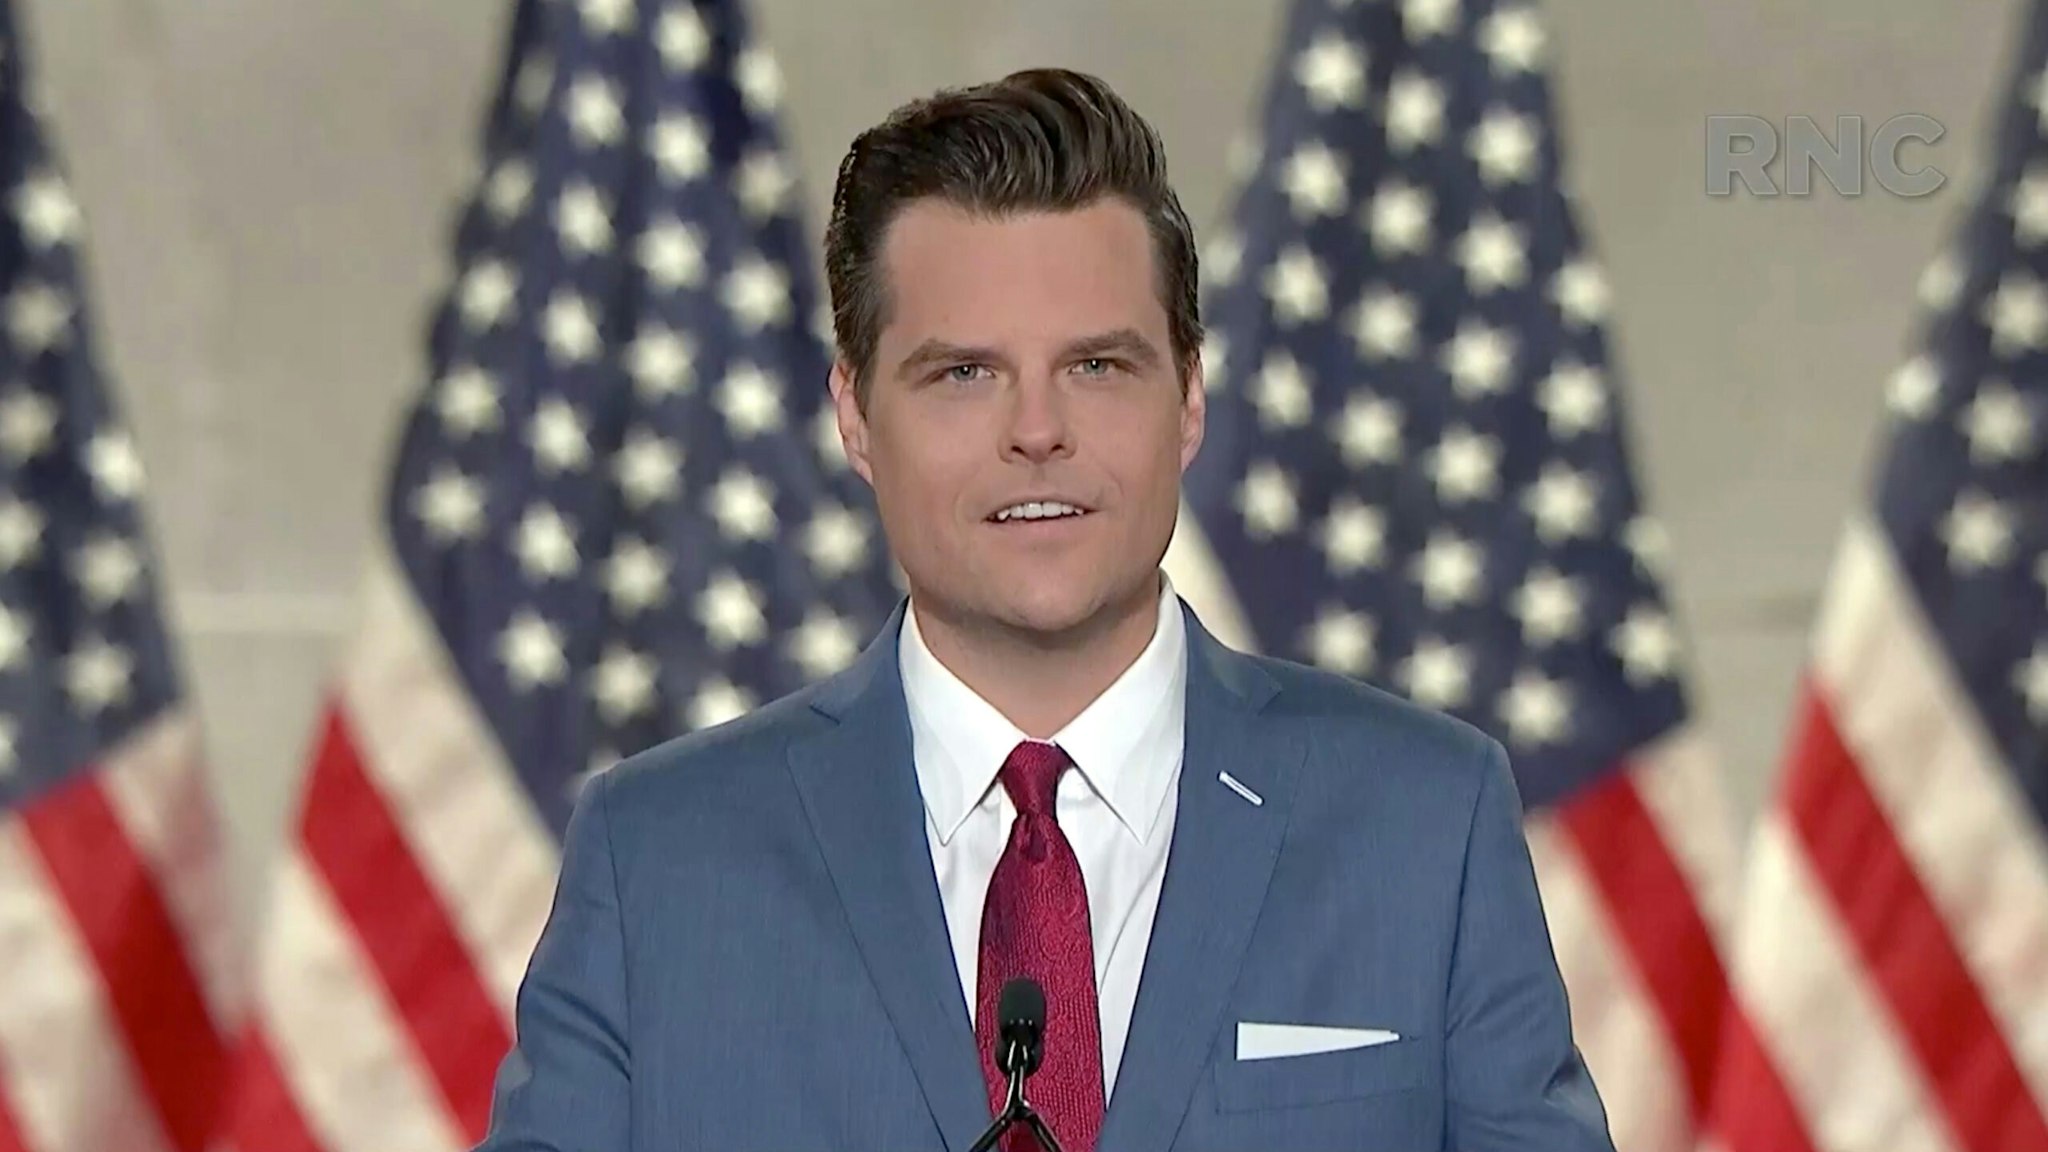 CHARLOTTE, NC - AUGUST 24: (EDITORIAL USE ONLY) In this screenshot from the RNC’s livestream of the 2020 Republican National Convention, U.S. Rep. Matt Gaetz (R-FL) addresses the virtual convention on August 24, 2020. The convention is being held virtually due to the coronavirus pandemic but will include speeches from various locations including Charlotte, North Carolina and Washington, DC.